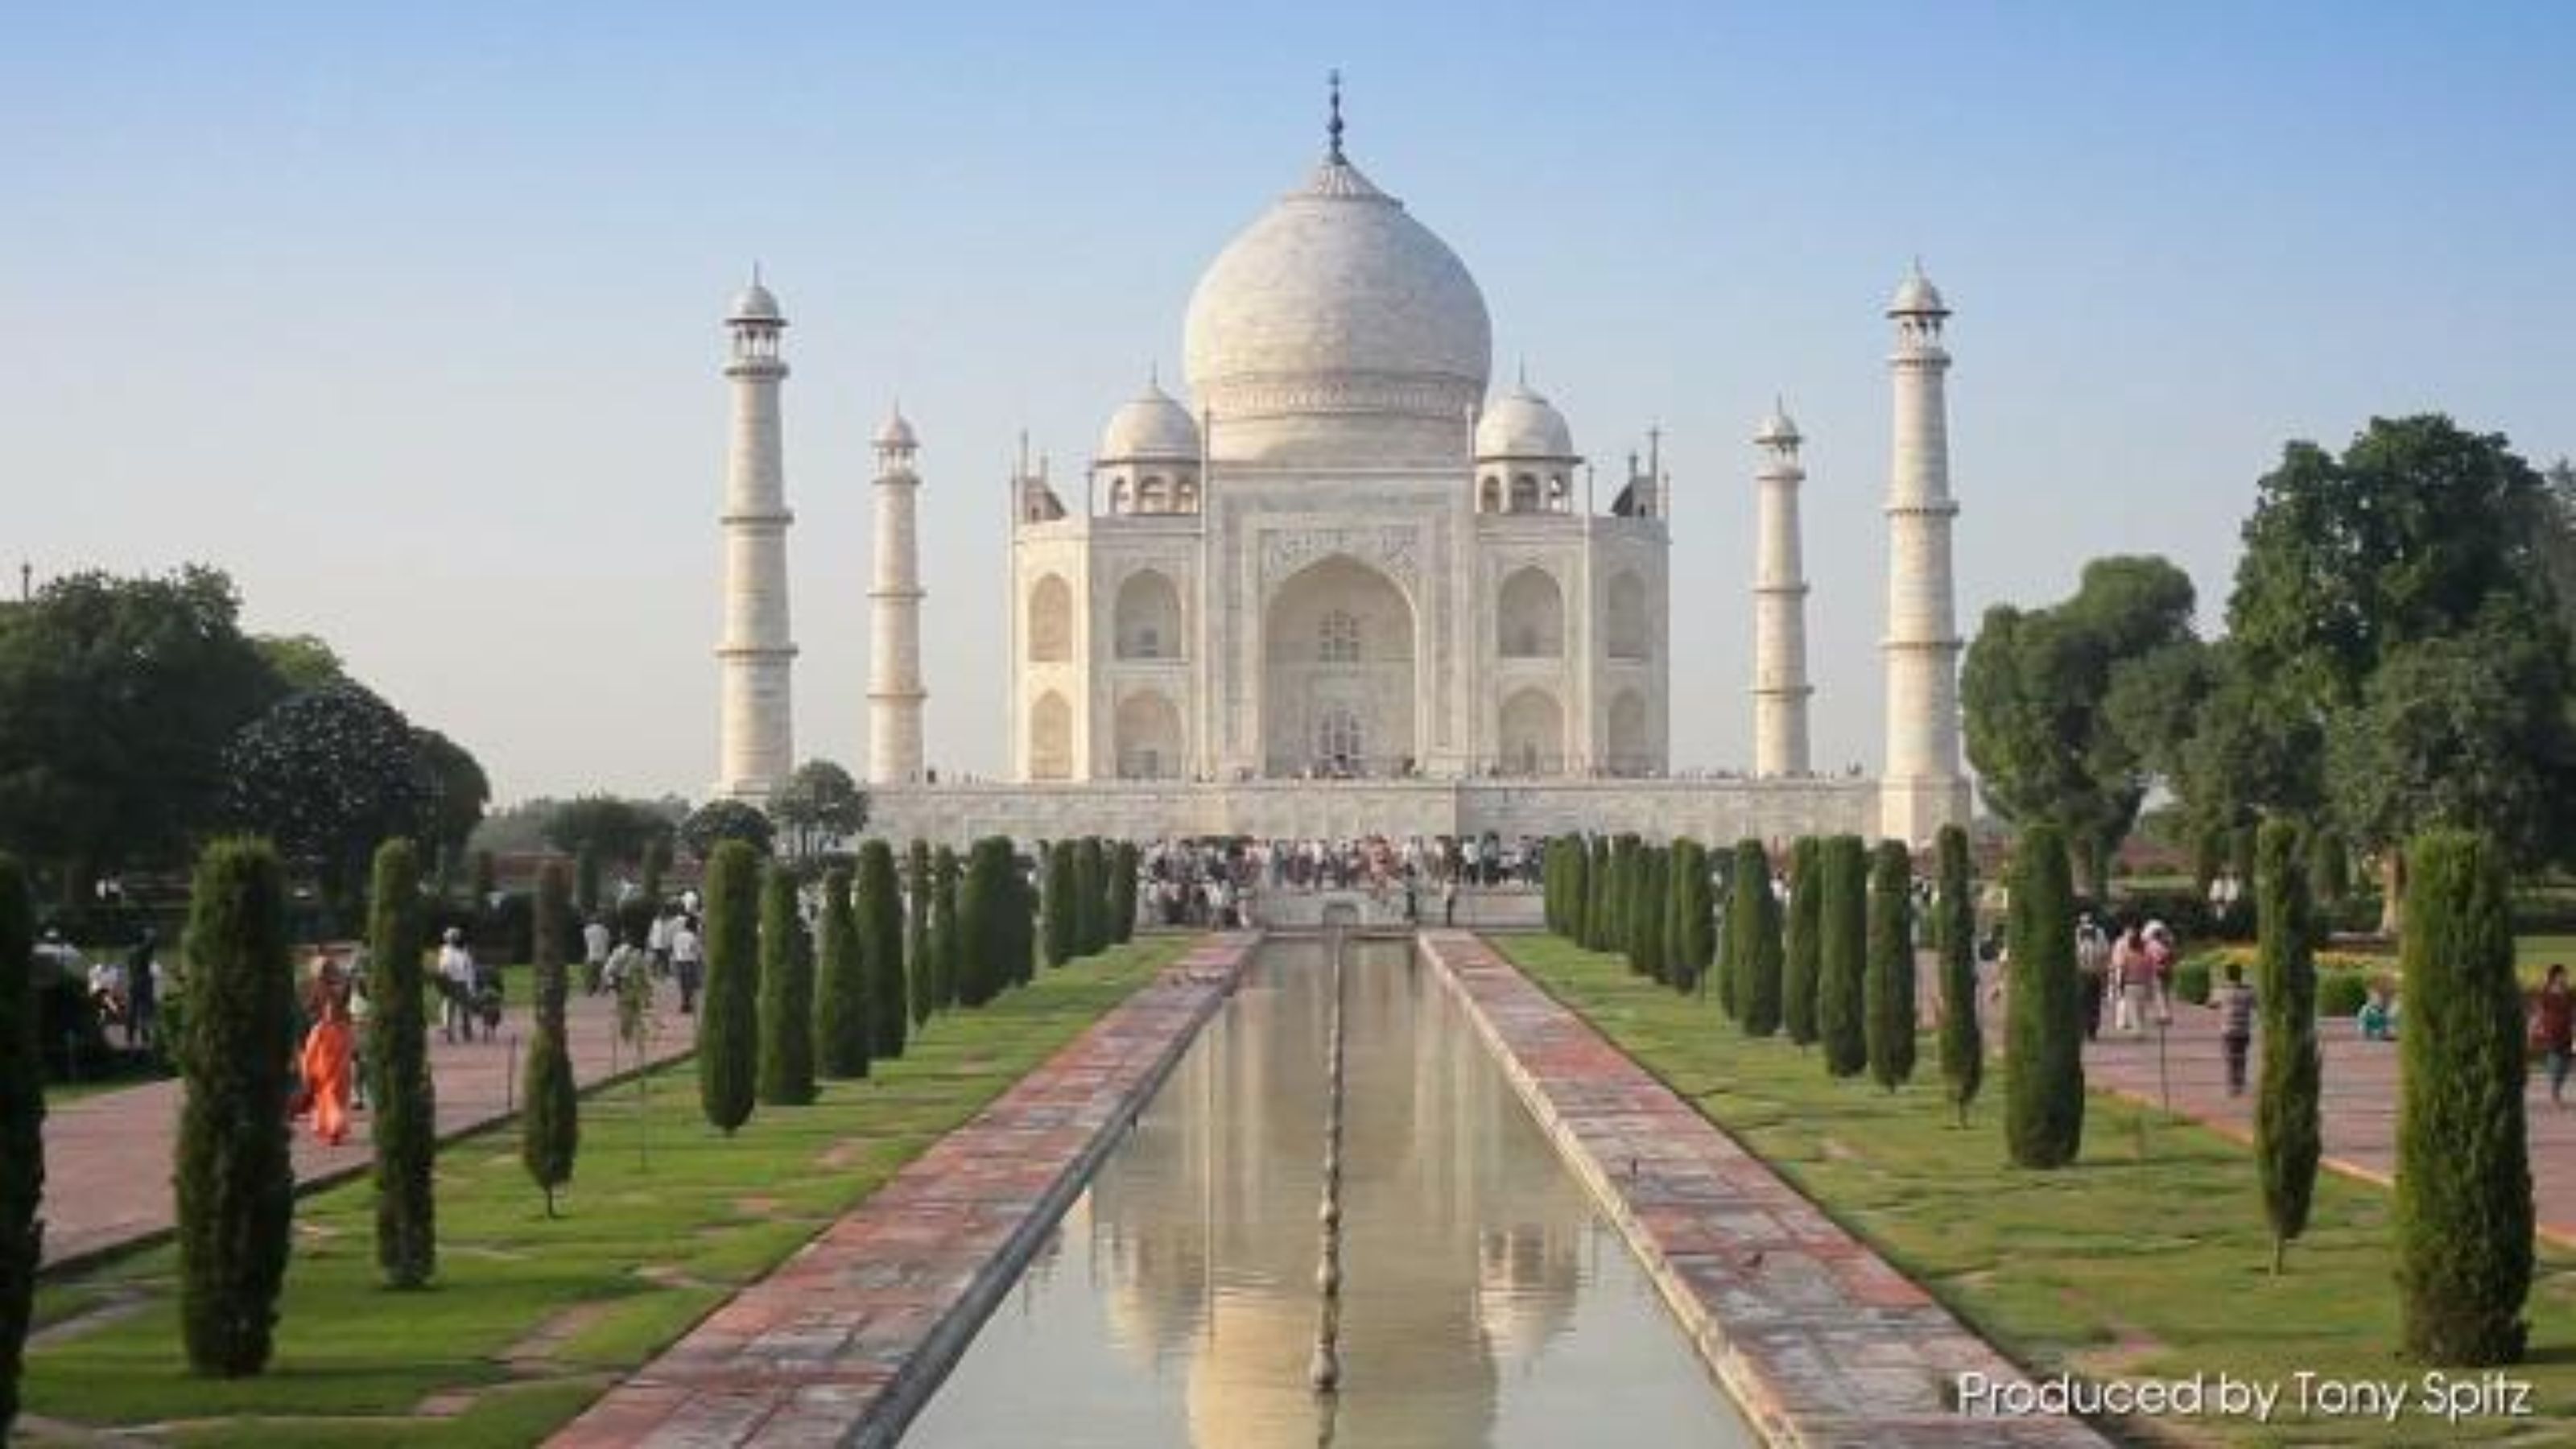 The Taj Mahal may cut the number of daily visitors in half